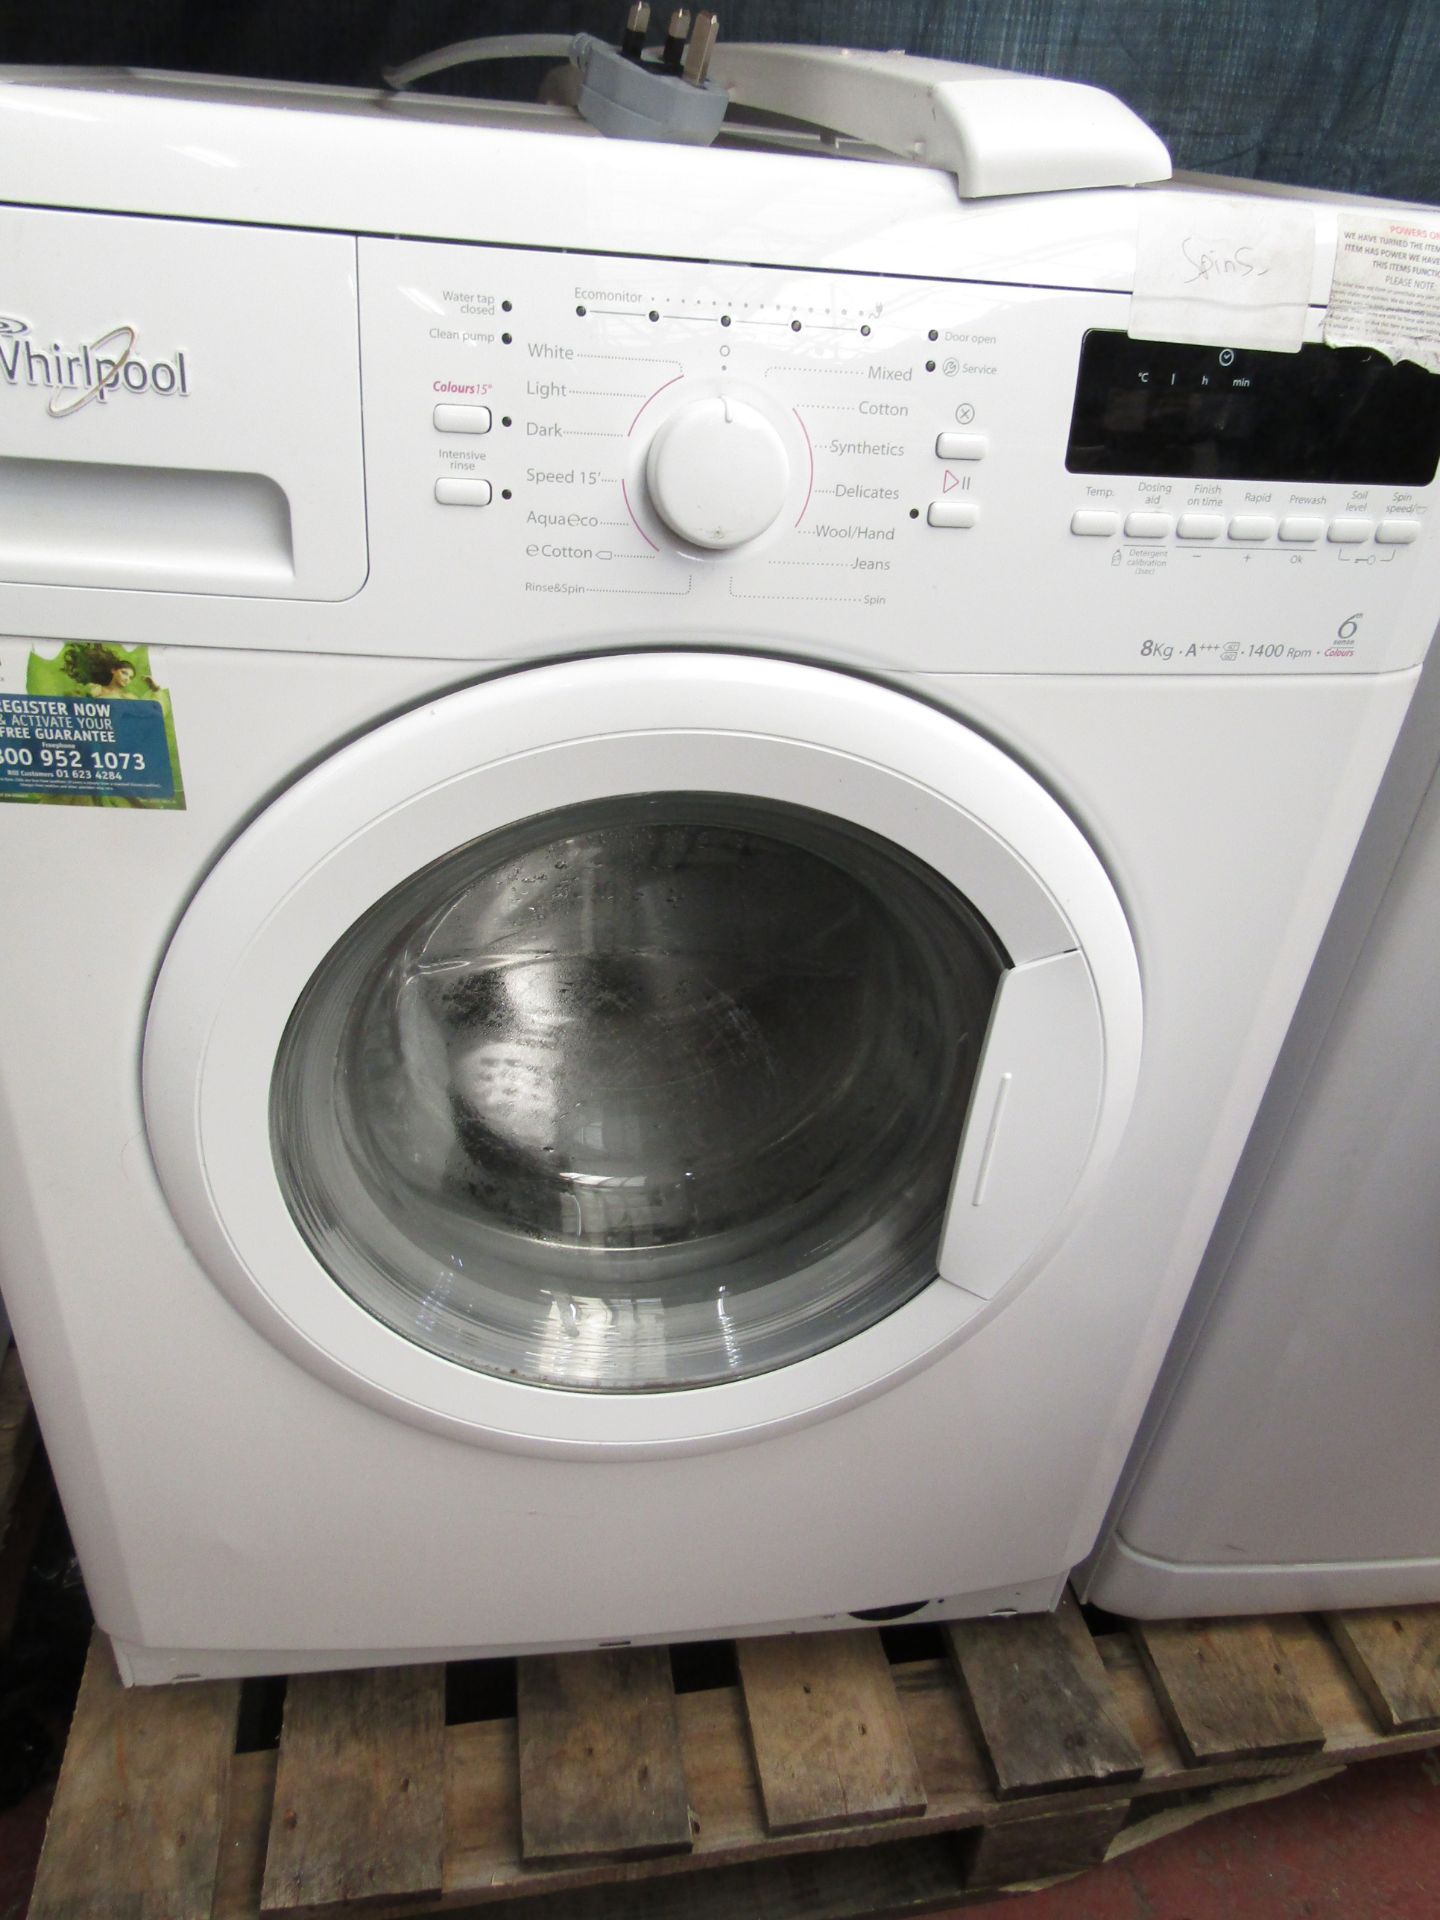 Whirlpool 6th sense colours washing machine, powers on and spins